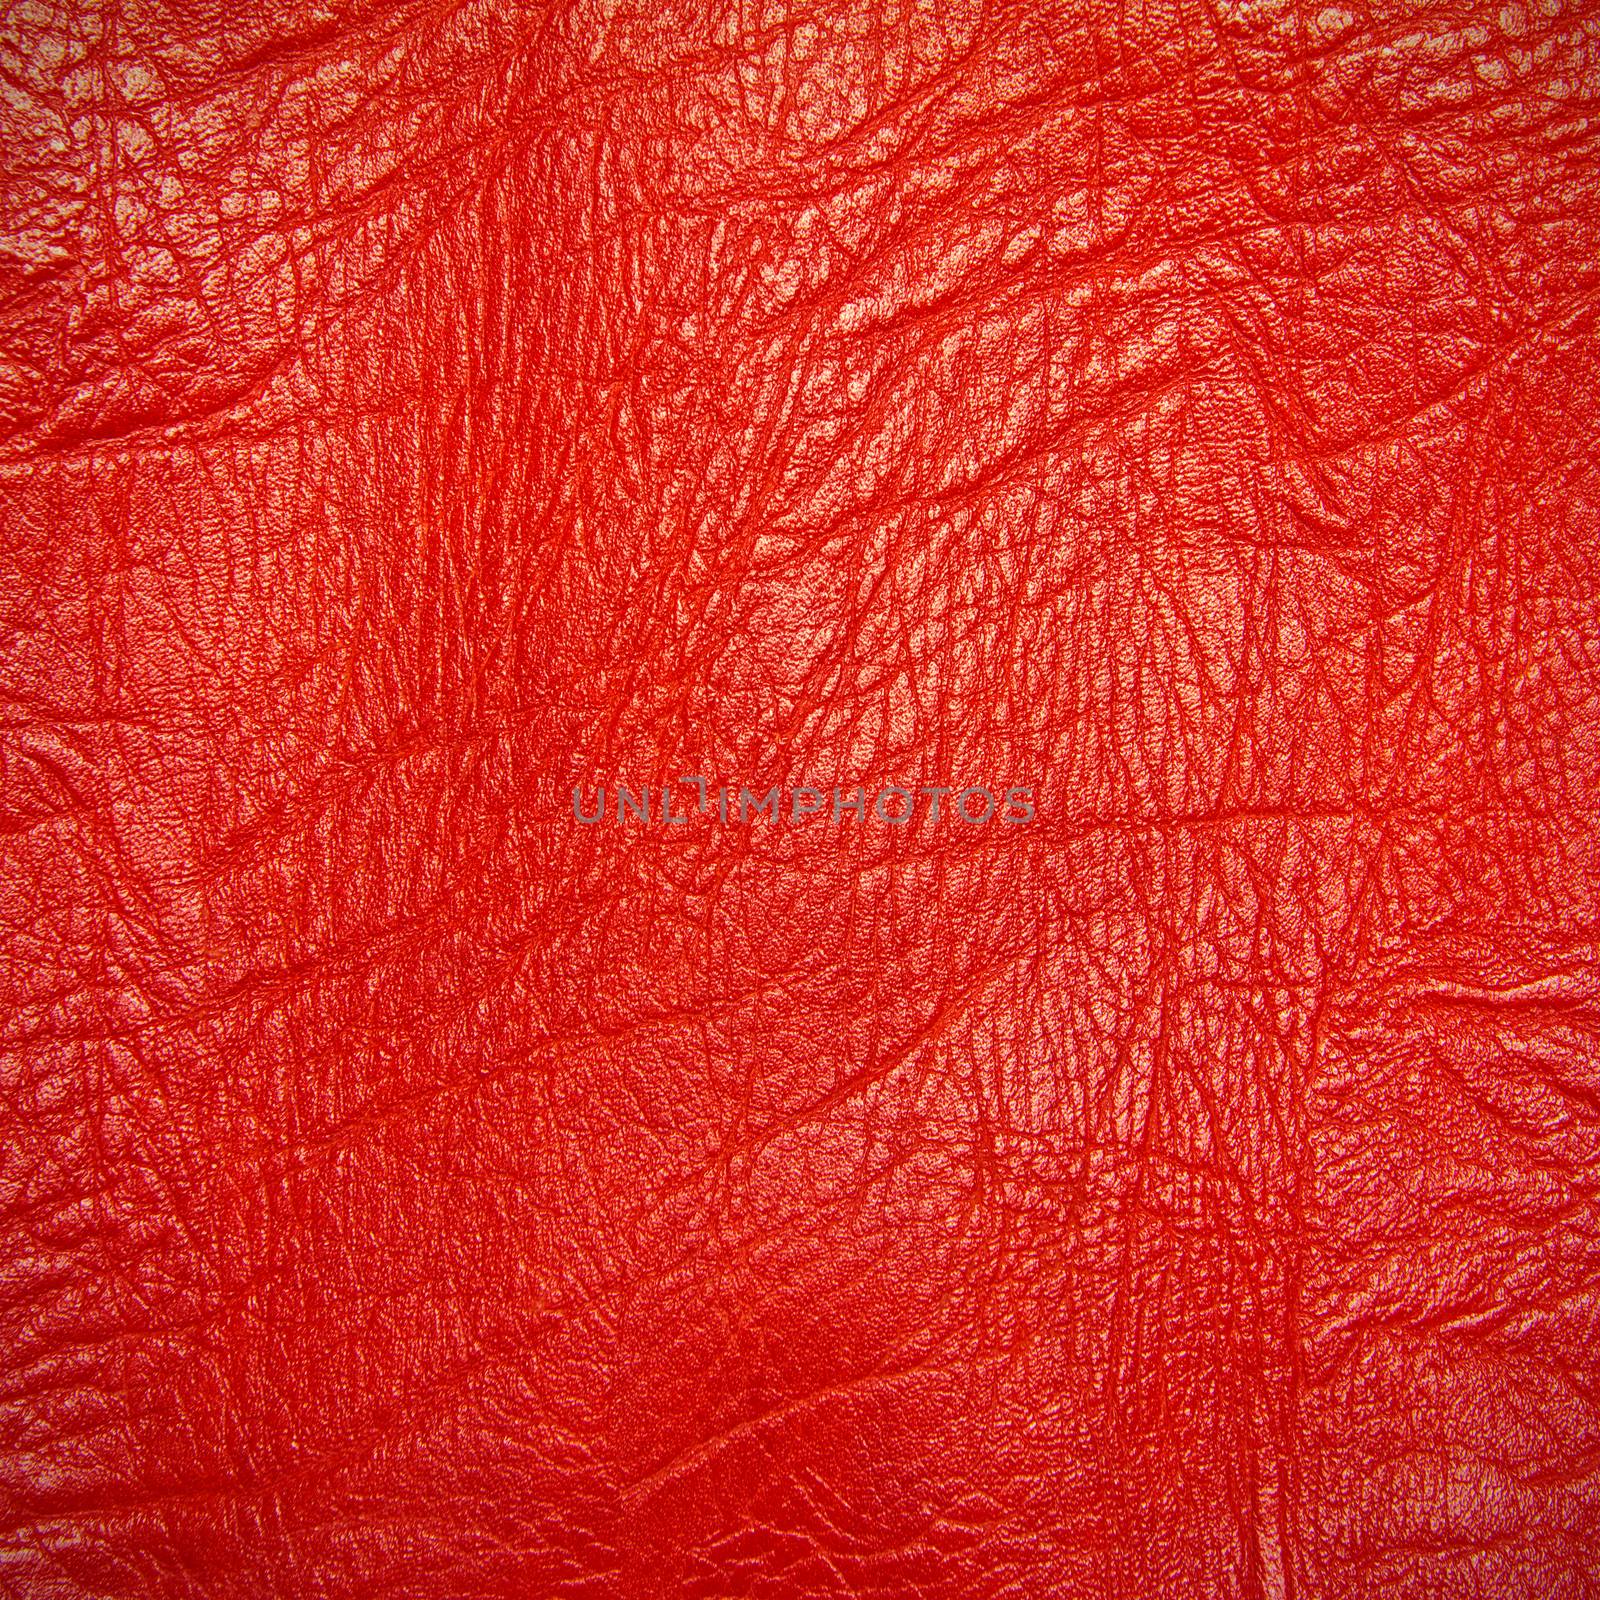 backgrounds of red leather texture  by wyoosumran